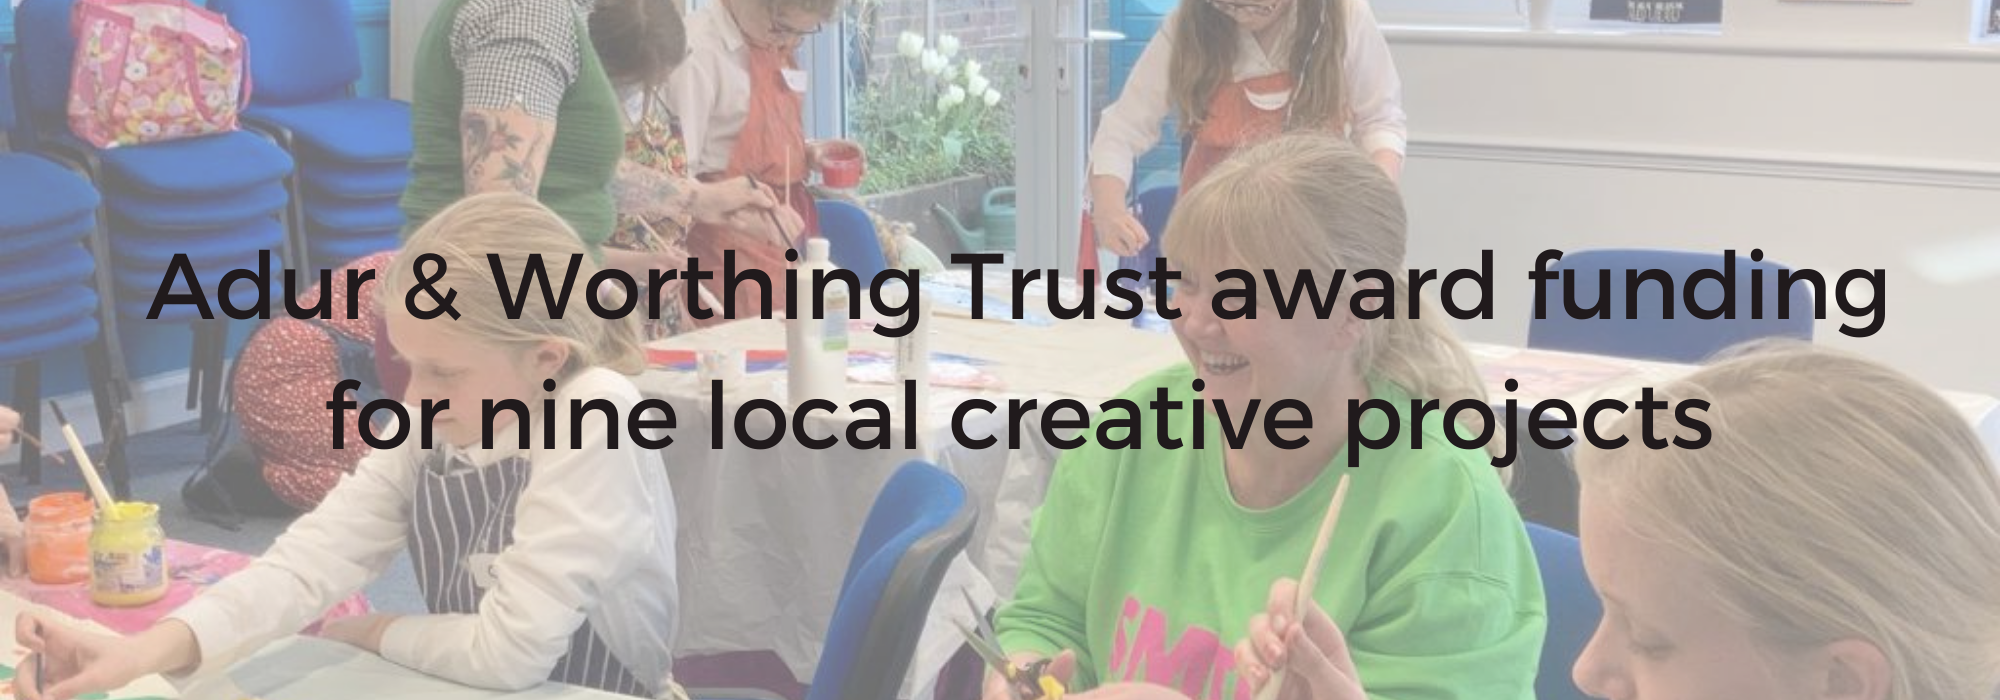 Adur & Worthing Trust award funding for nine local projects